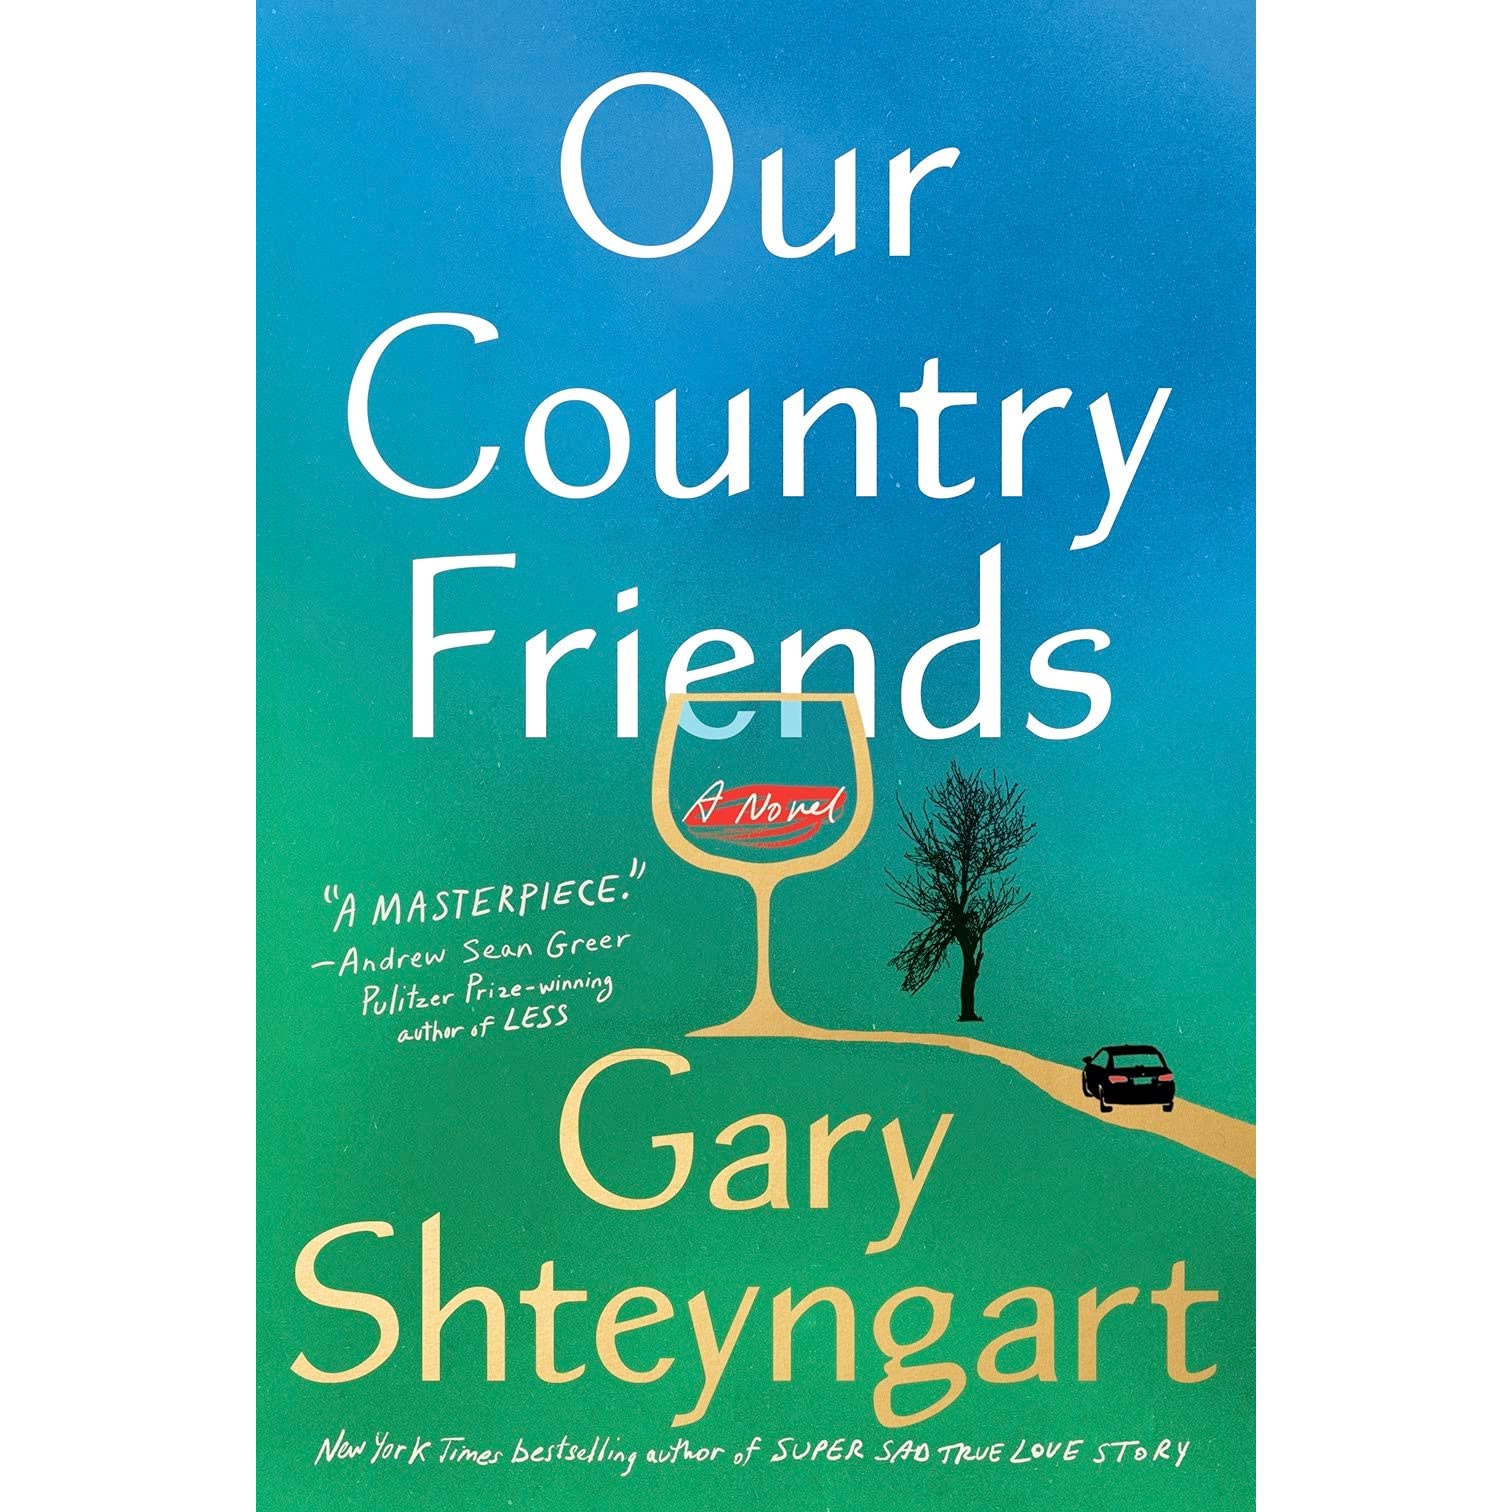 The cover of Our Country Friends.